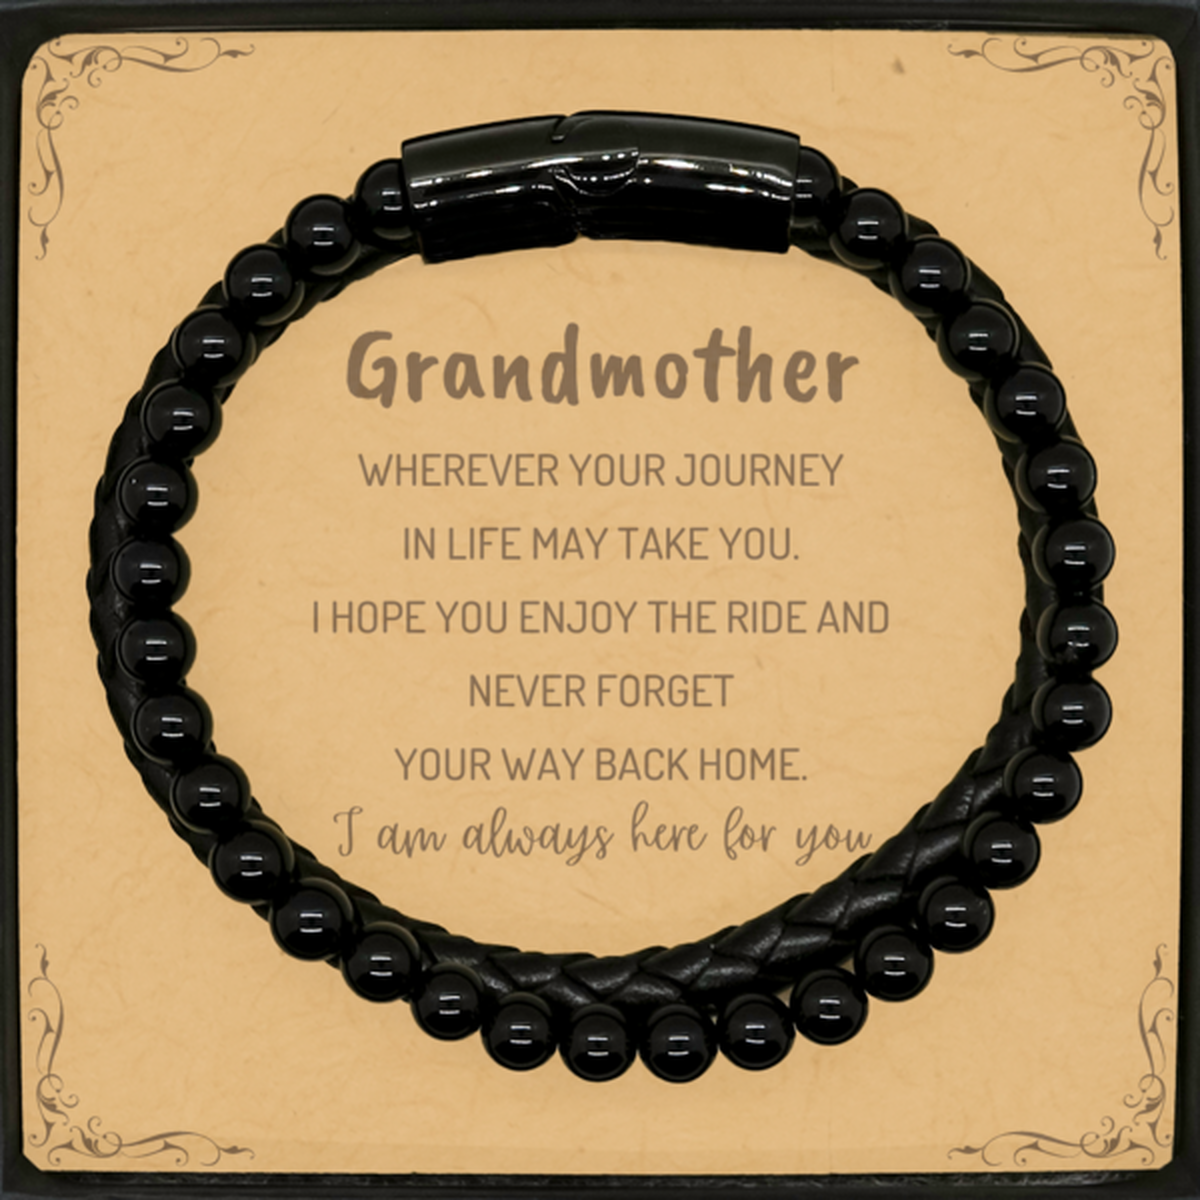 Grandmother wherever your journey in life may take you, I am always here for you Grandmother Stone Leather Bracelets, Awesome Christmas Gifts For Grandmother Message Card, Grandmother Birthday Gifts for Men Women Family Loved One